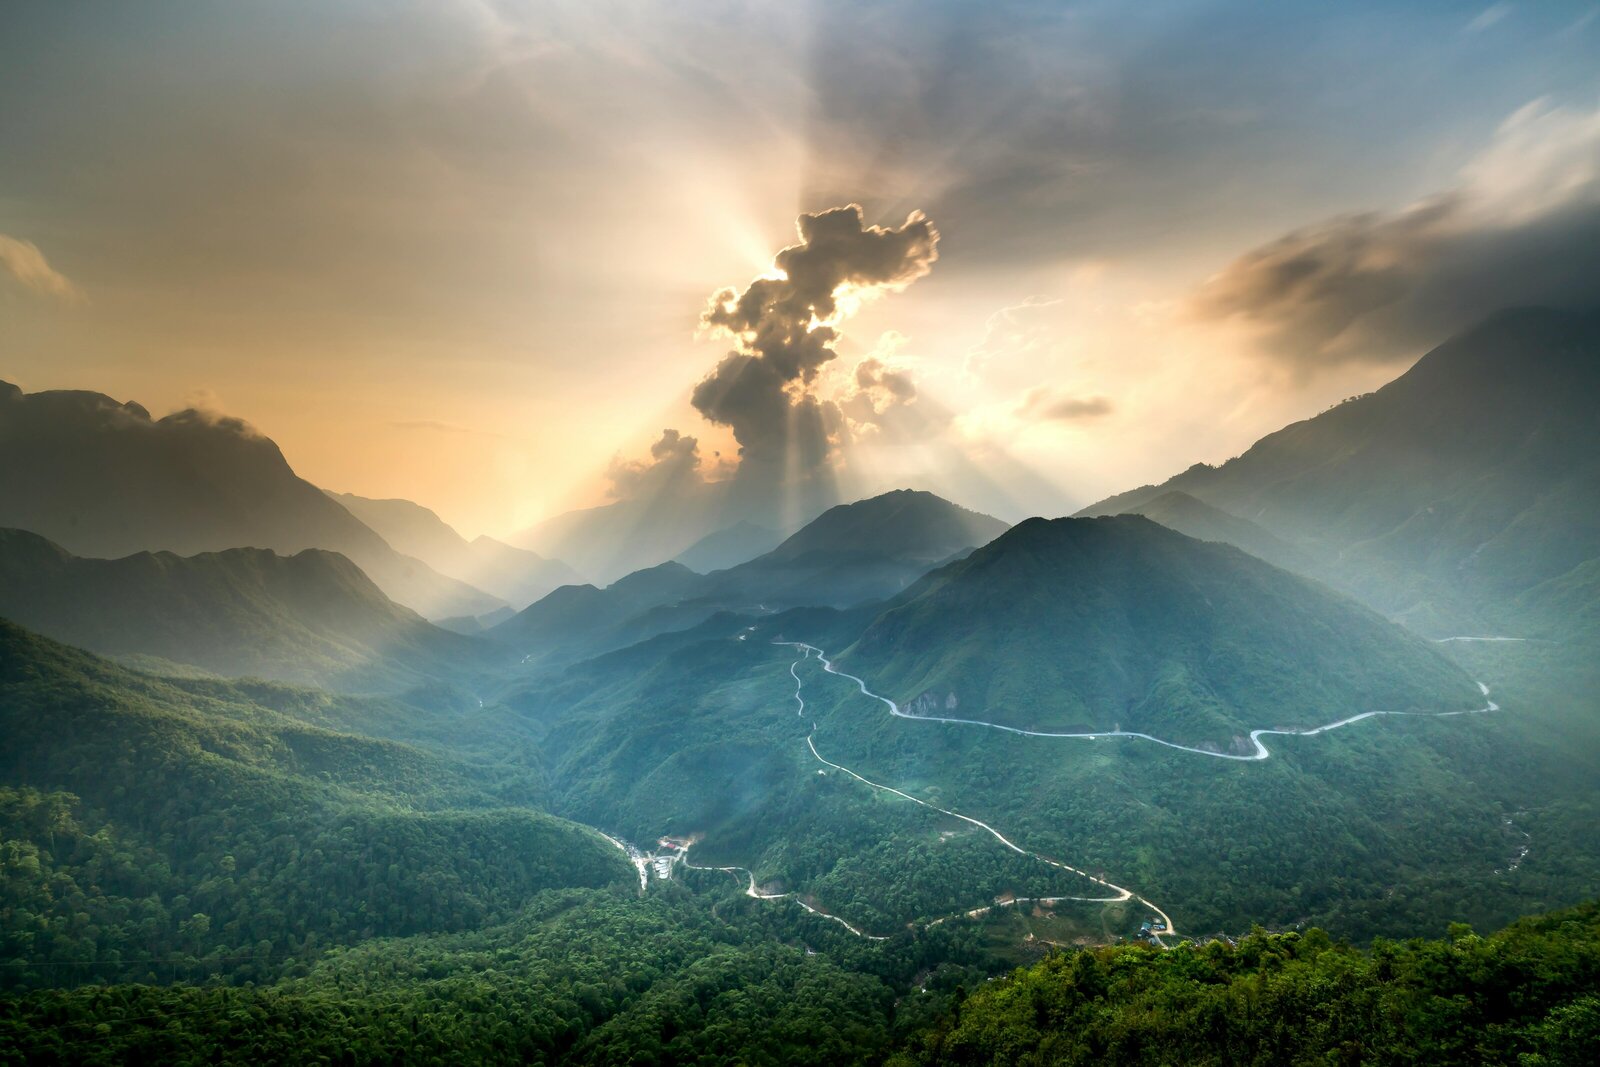 Image of a mountain range with a sun rays coming out of clouds above.